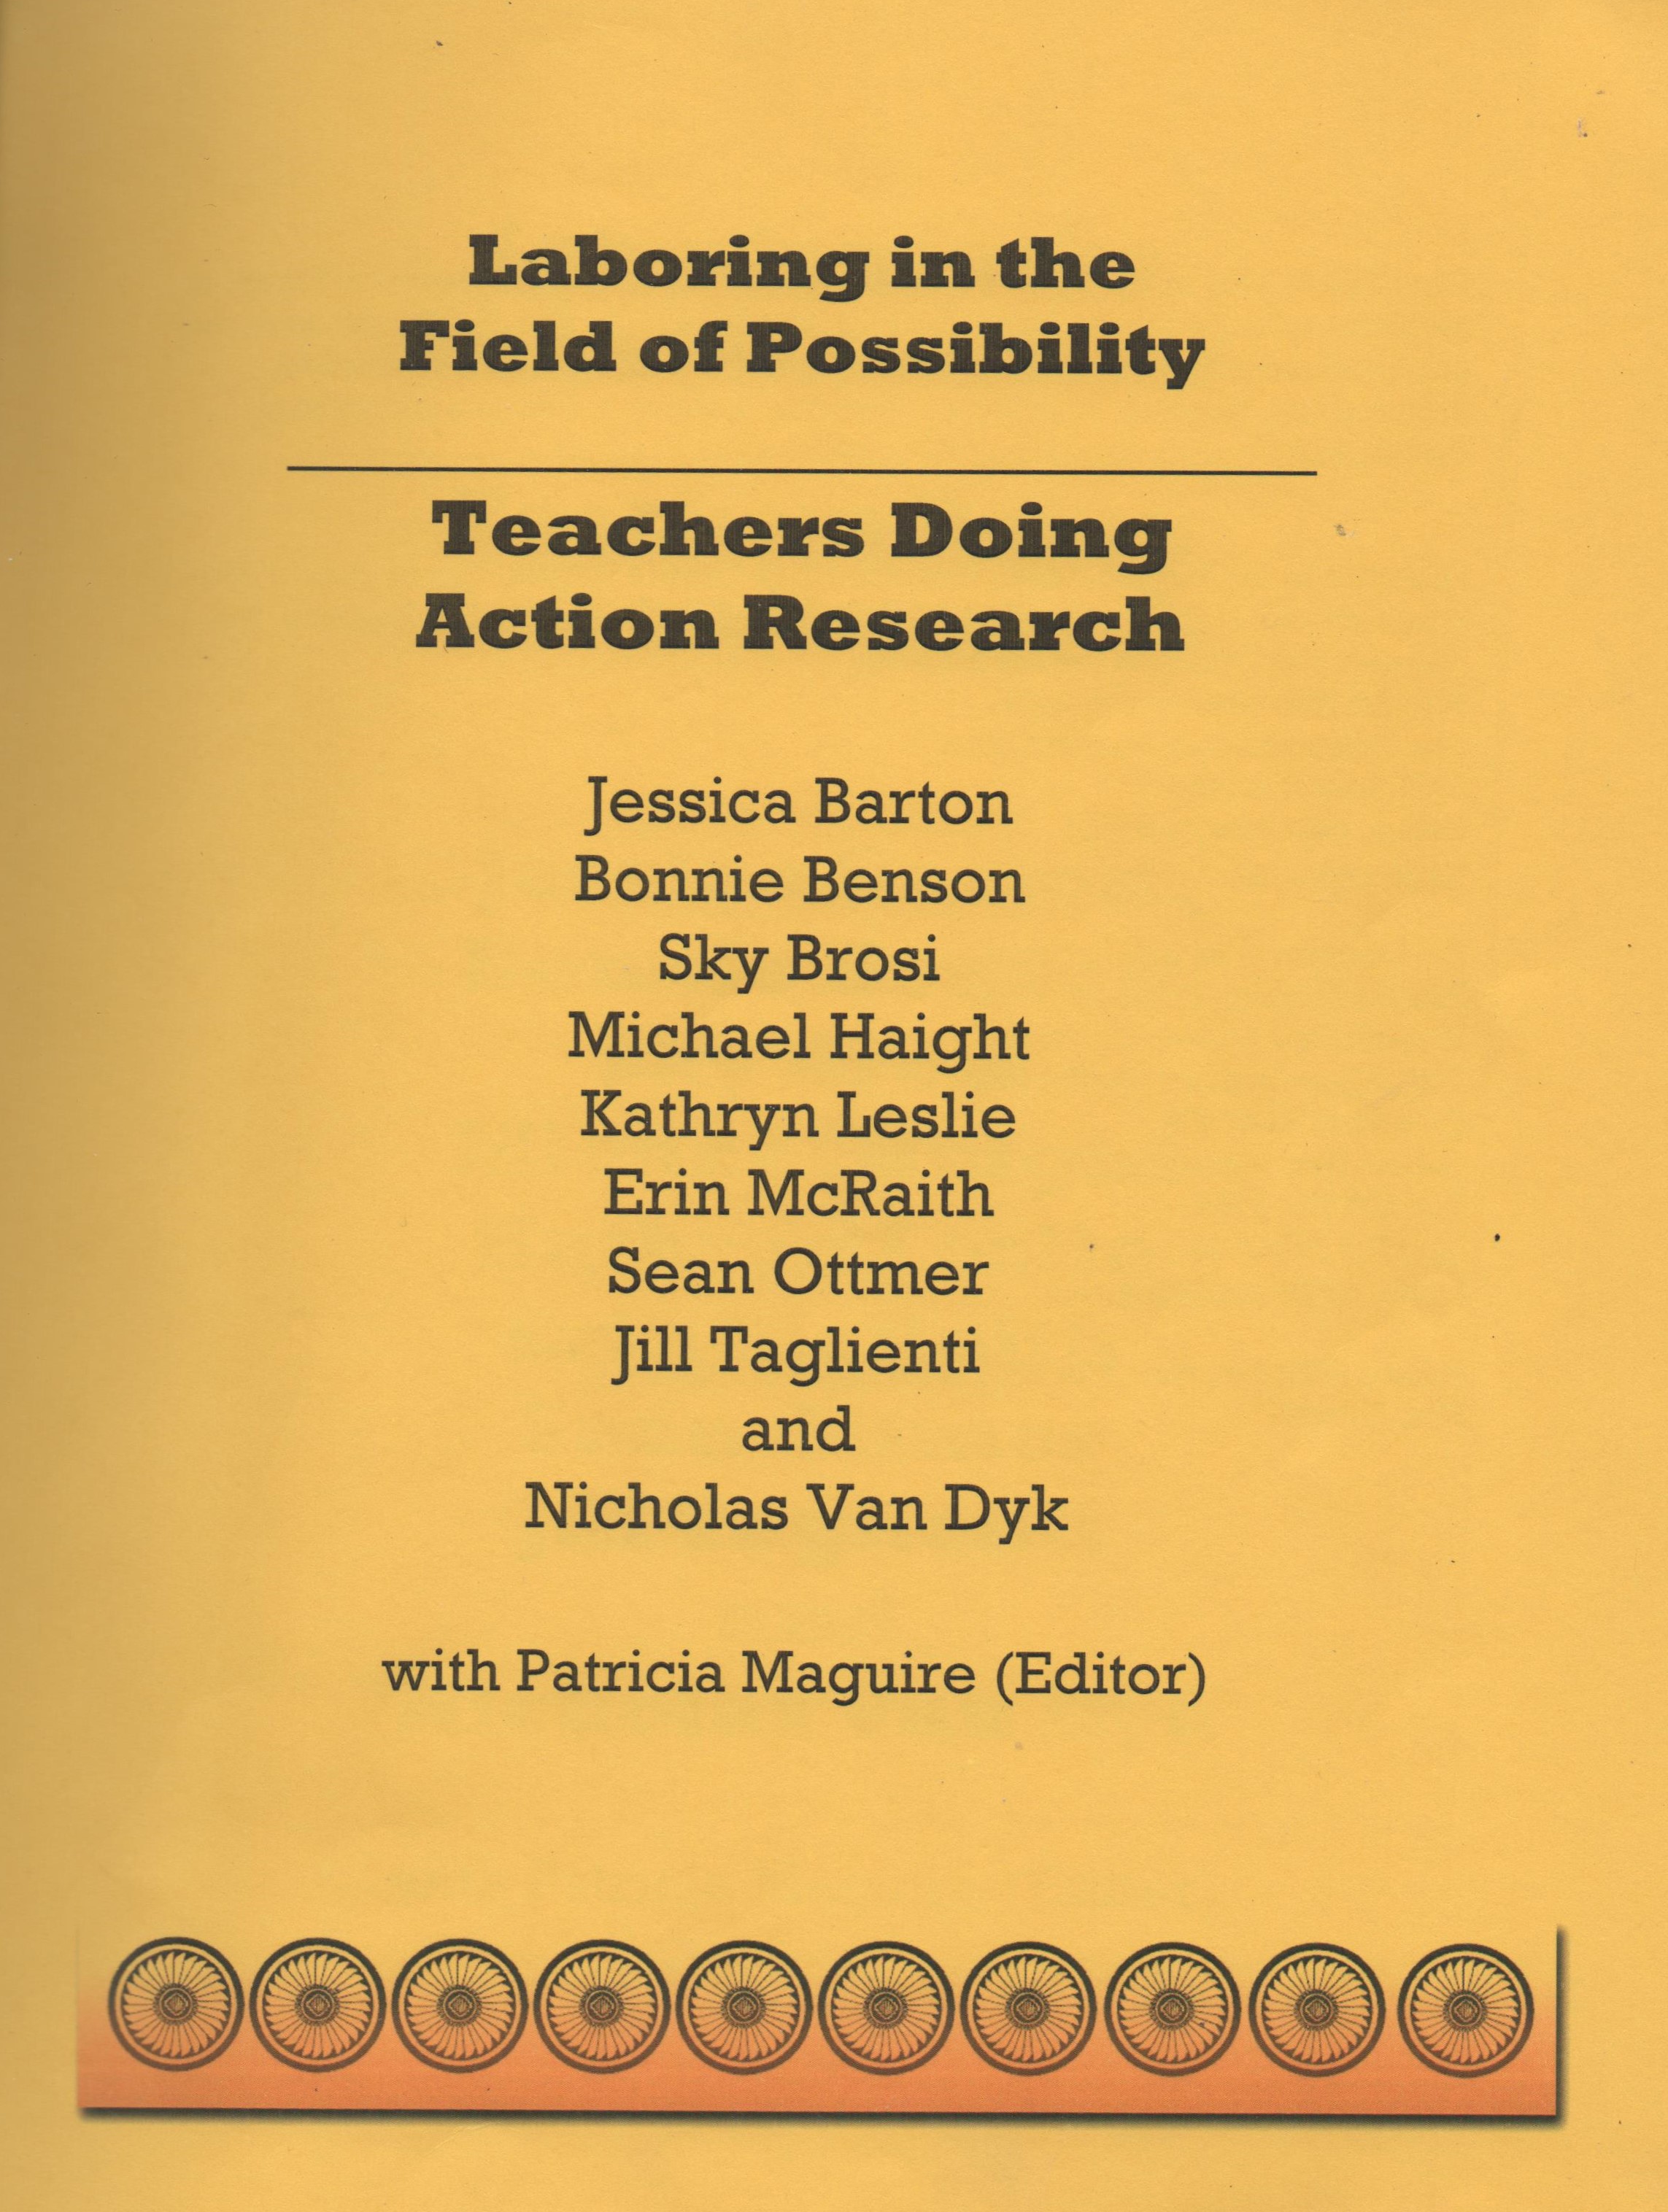 Laboring in the field of possibily: Teachers doing action research